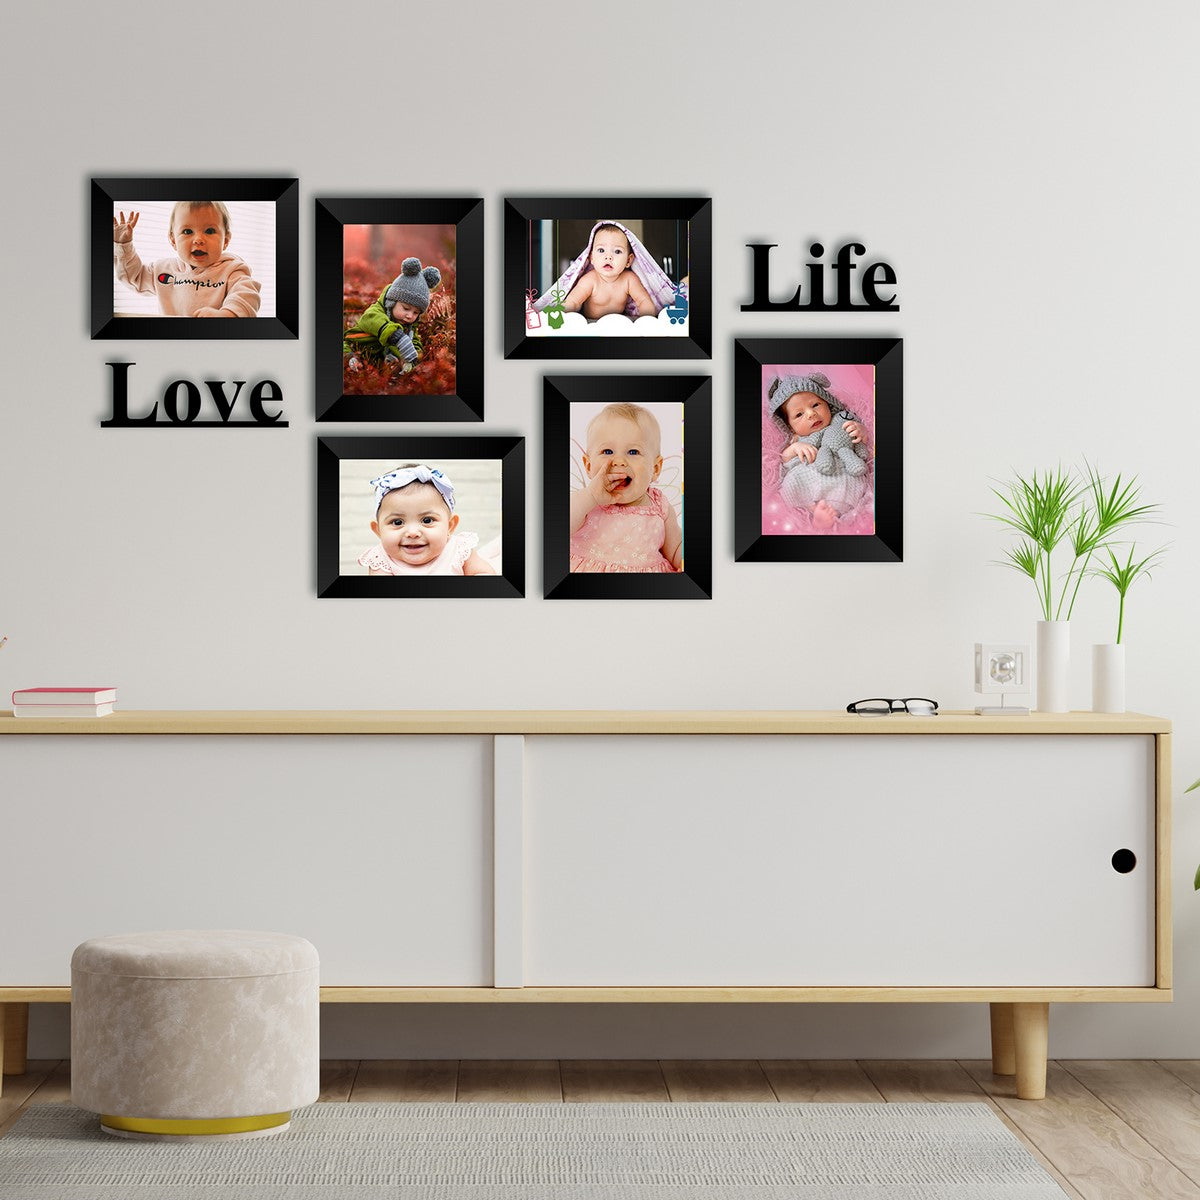 Memory Wall Collage Photo Frame - Set of 6 Photo Frames for 6 Photos of 5"x7", 1 piece of LOVE, 1 piece of LIFE 2